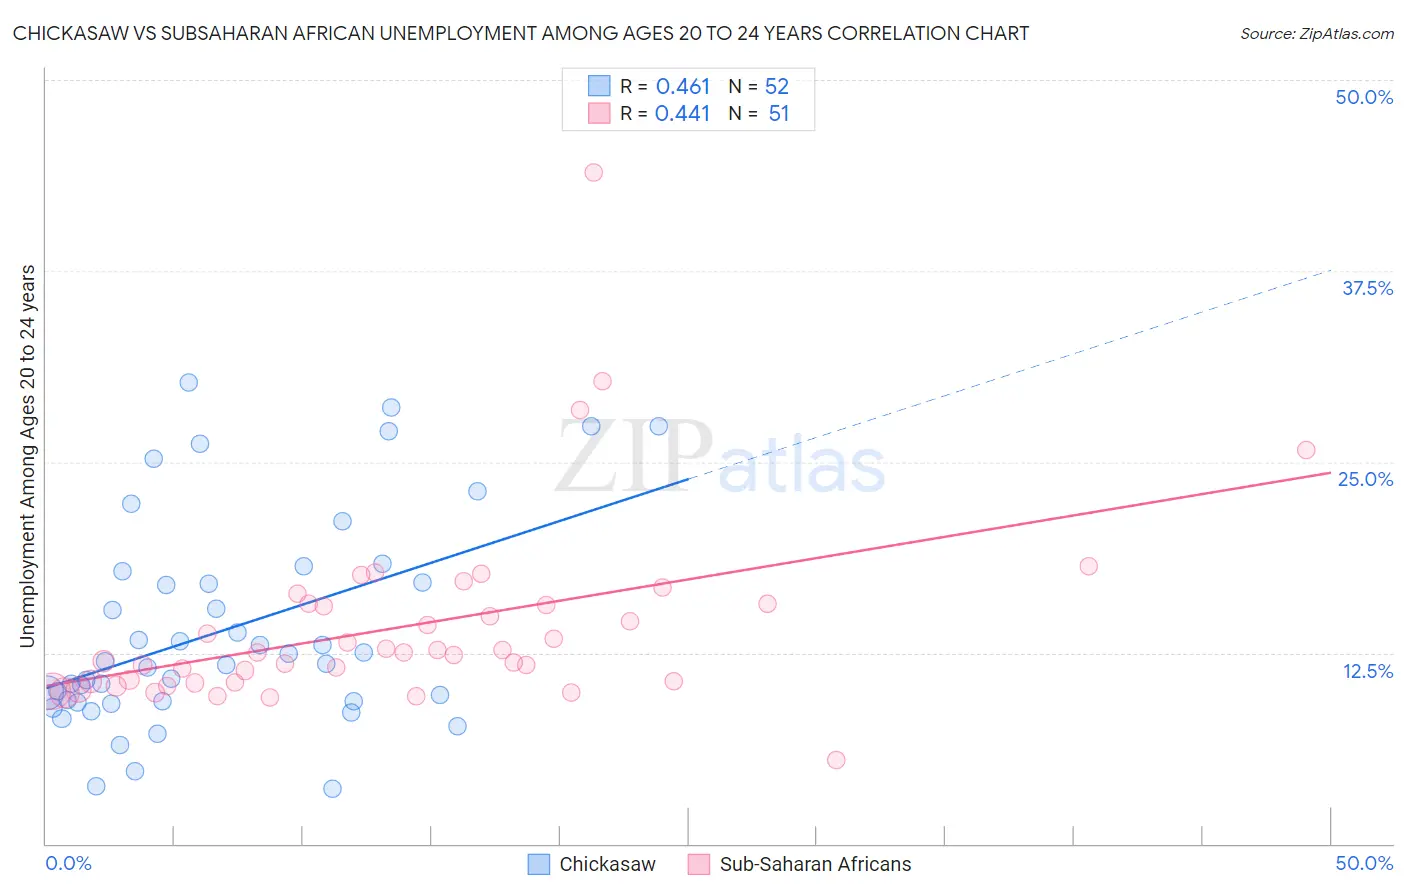 Chickasaw vs Subsaharan African Unemployment Among Ages 20 to 24 years